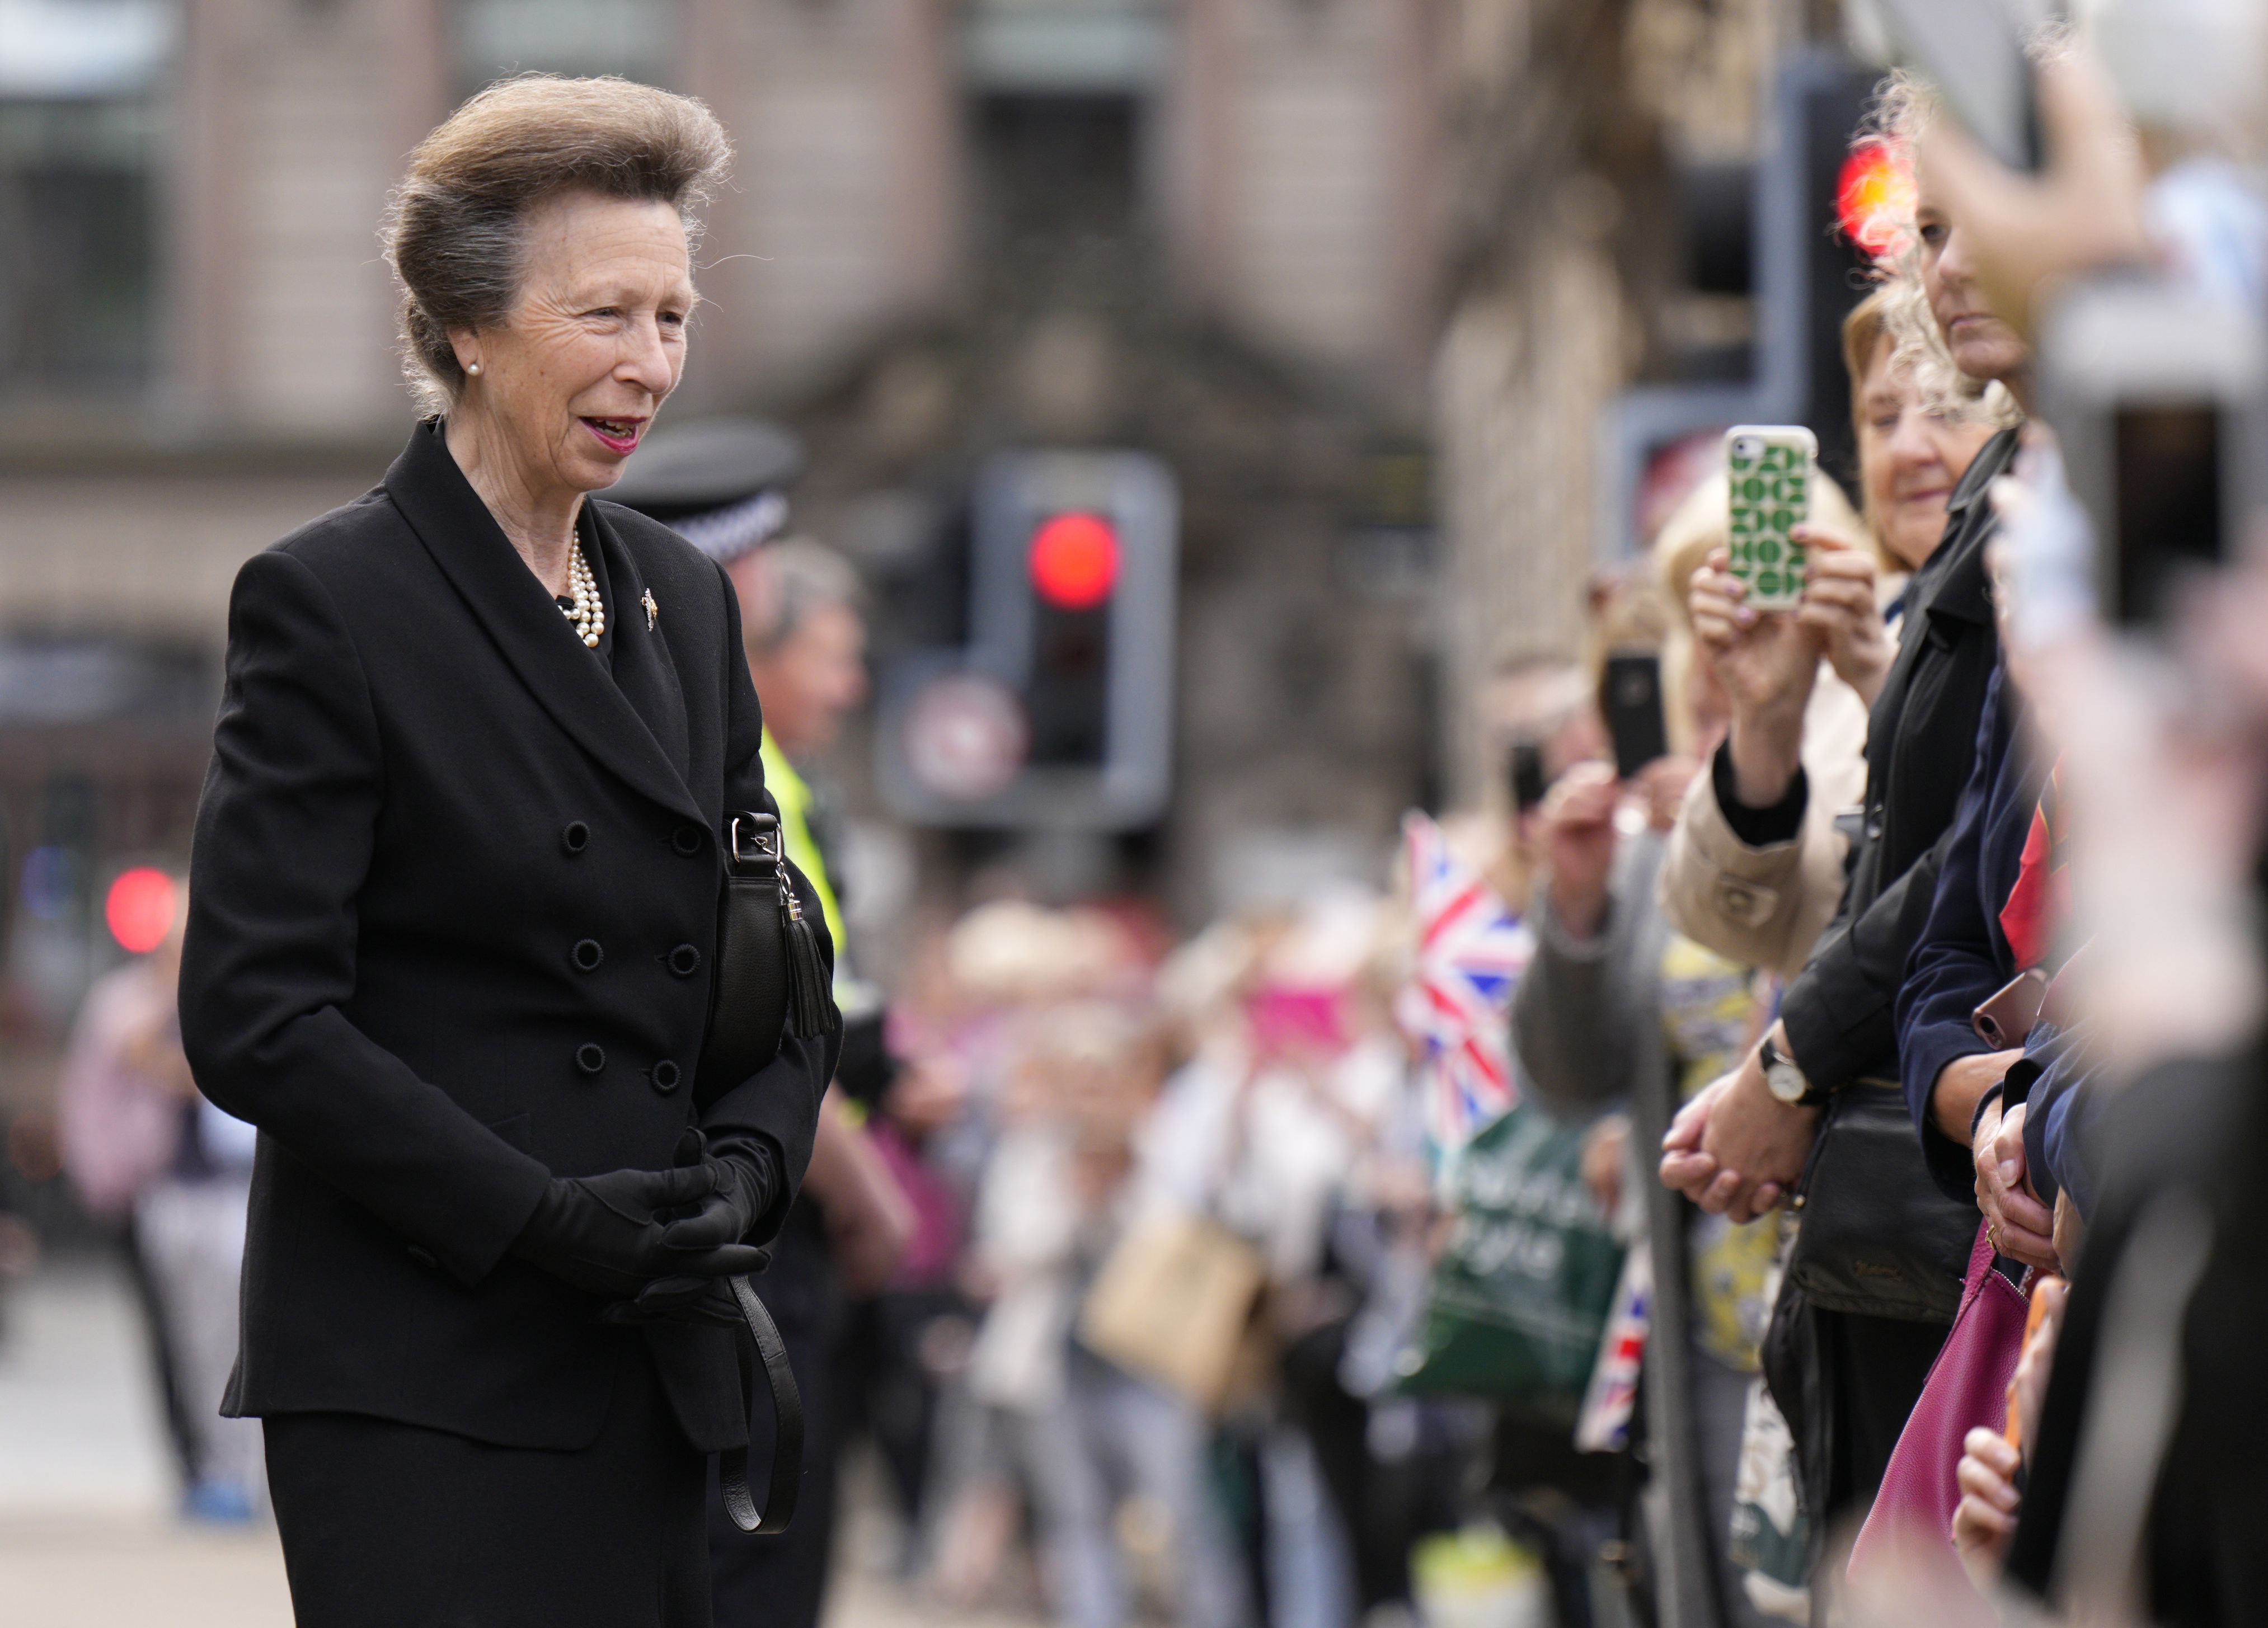 <p>Princess Anne greeted members of the public and viewed tributes laid outside City Chambers in Glasgow, Scotland, on Sept. 15, 2022, after meeting representatives of organizations of which her late mother, Queen Elizabeth II, was patron, in the run-up to the monarch's funeral. She and other senior royals stepped in to support her brother King Charles III as he retreated to his Highgrove estate to spend a day in quiet reflection after a packed schedule of events following their mother's death on Sept. 8.</p>